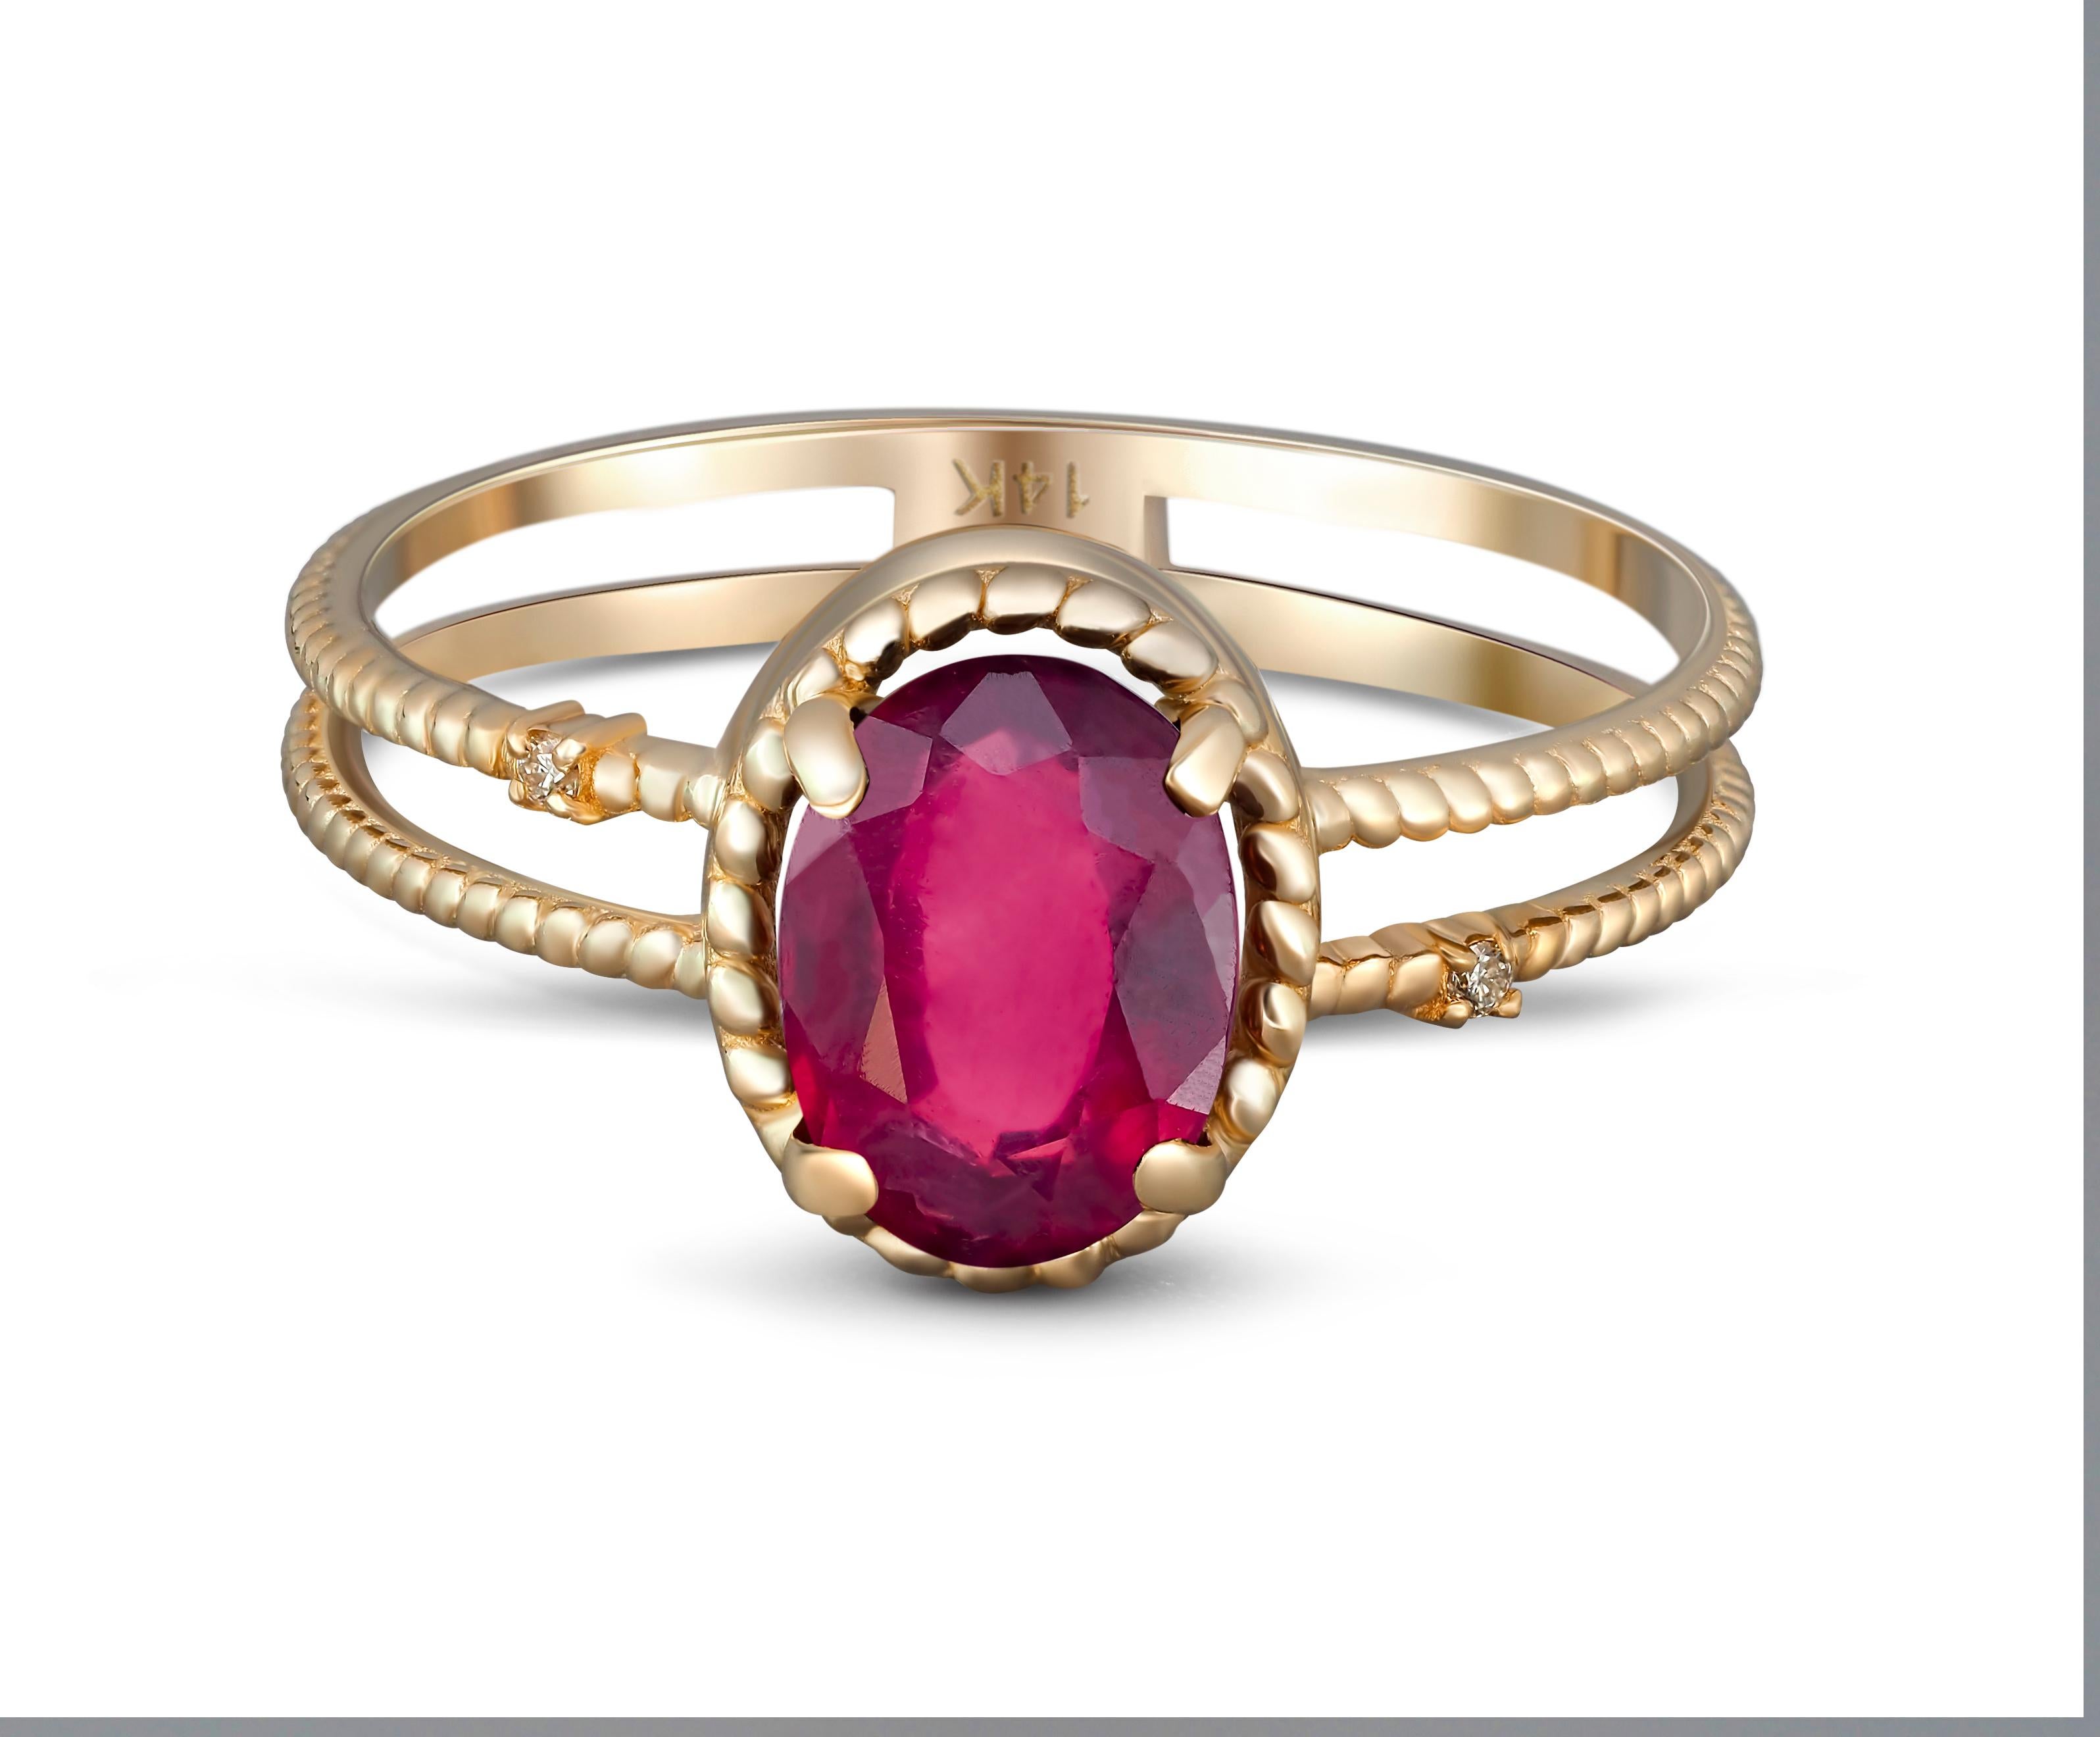 Oval ruby ring. 
14k gold ring with Ruby. Minimalist ruby ring. Ruby engagement ring. Ruby promise ring. Gift for her. July Birthstone Ring.

Metal: 14k gold
Weight: 1.8  g. depends from size.

Central stone: Natural Ruby
Weight -  approx 1 ct in